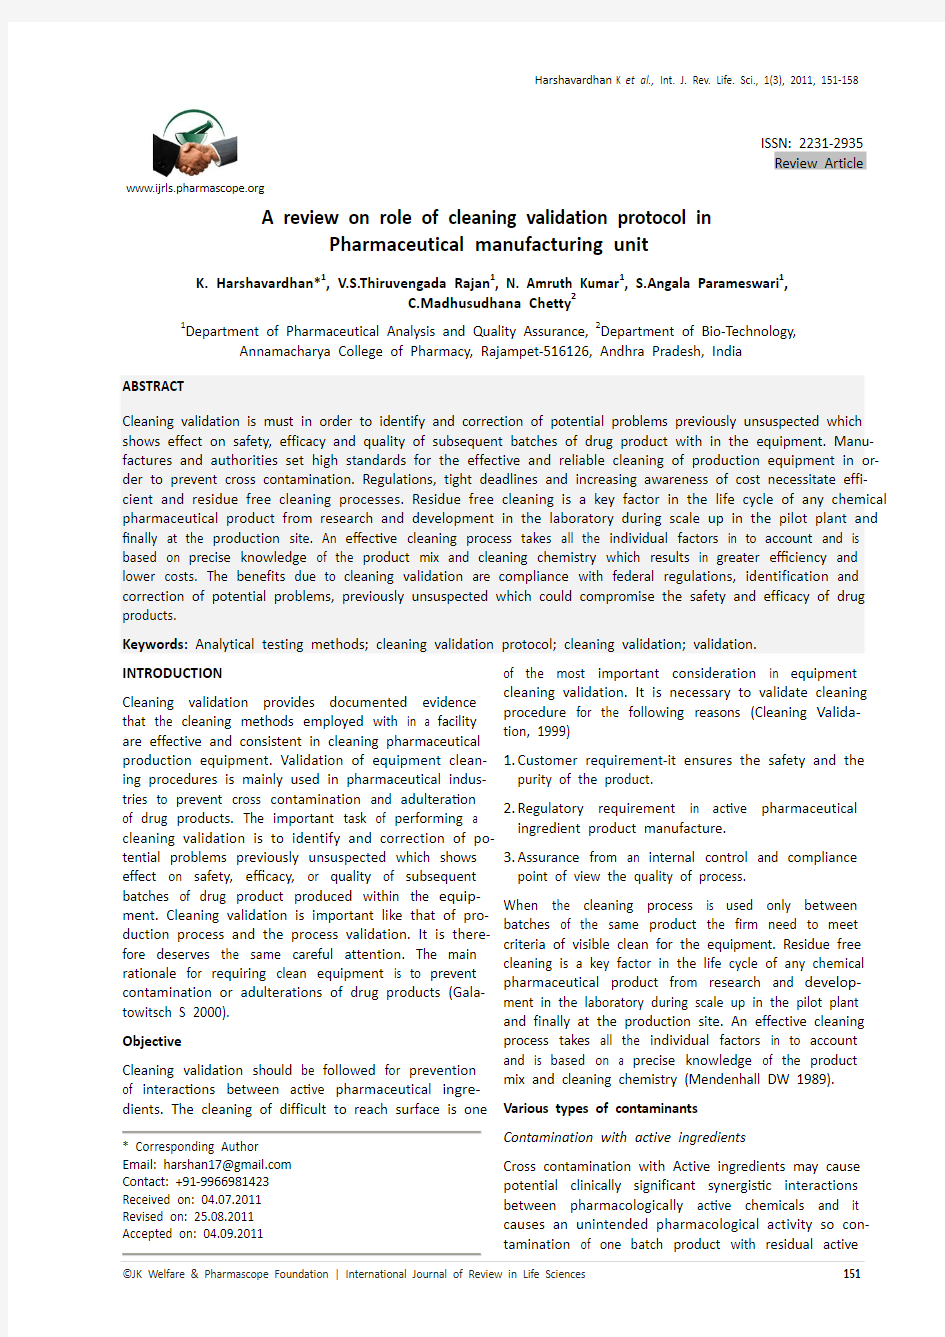 A review on role of cleaning validation protocol in Pharmaceutical manufacturing unit